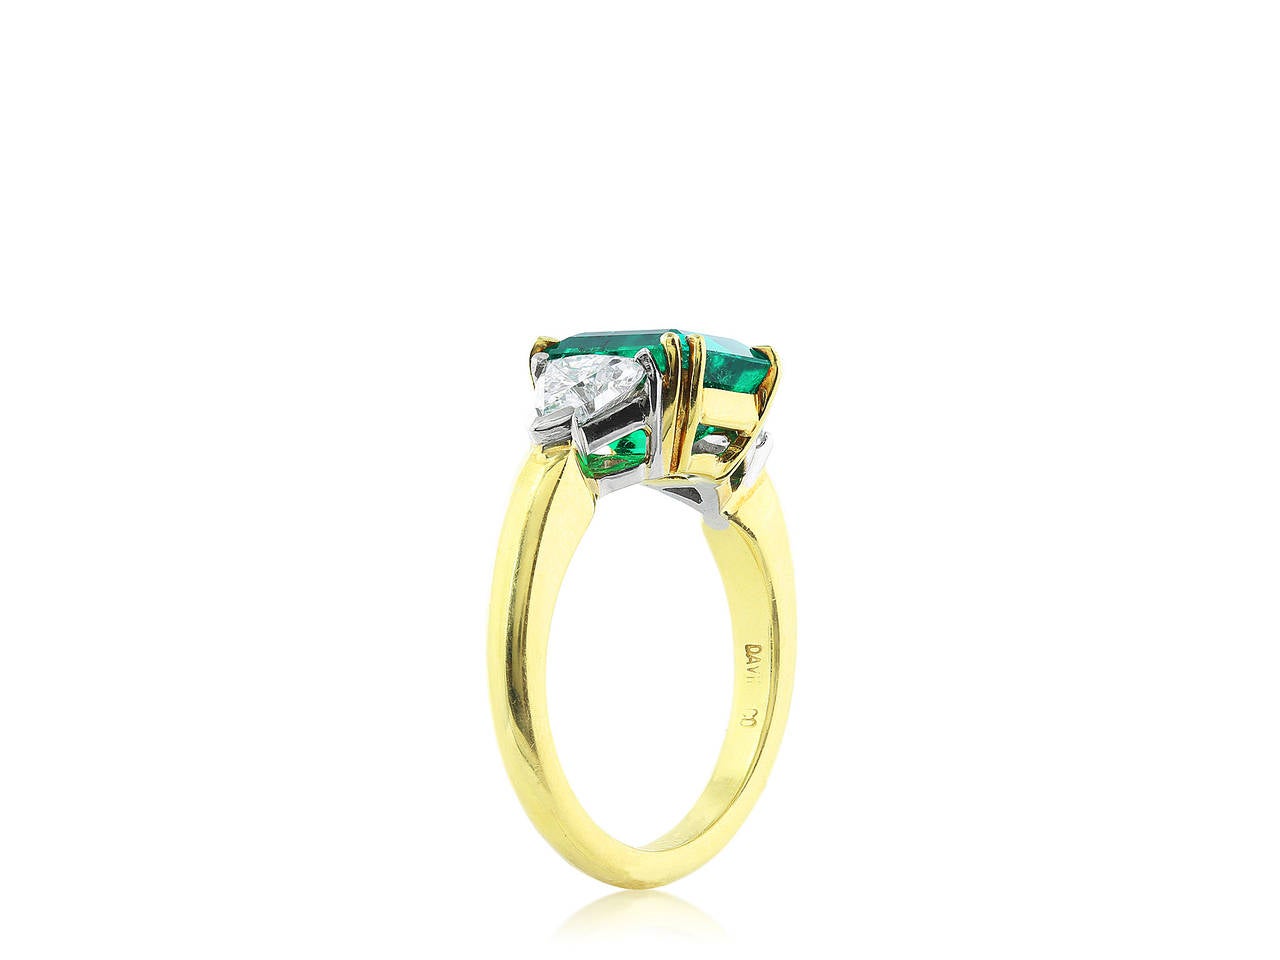 Platinum and 18 karat yellow gold three stone ring consisting of one emerald cut natural emerald weighing 2.47 carats flanked by two trilliant cut diamonds having a total weight of 1.02 carats.